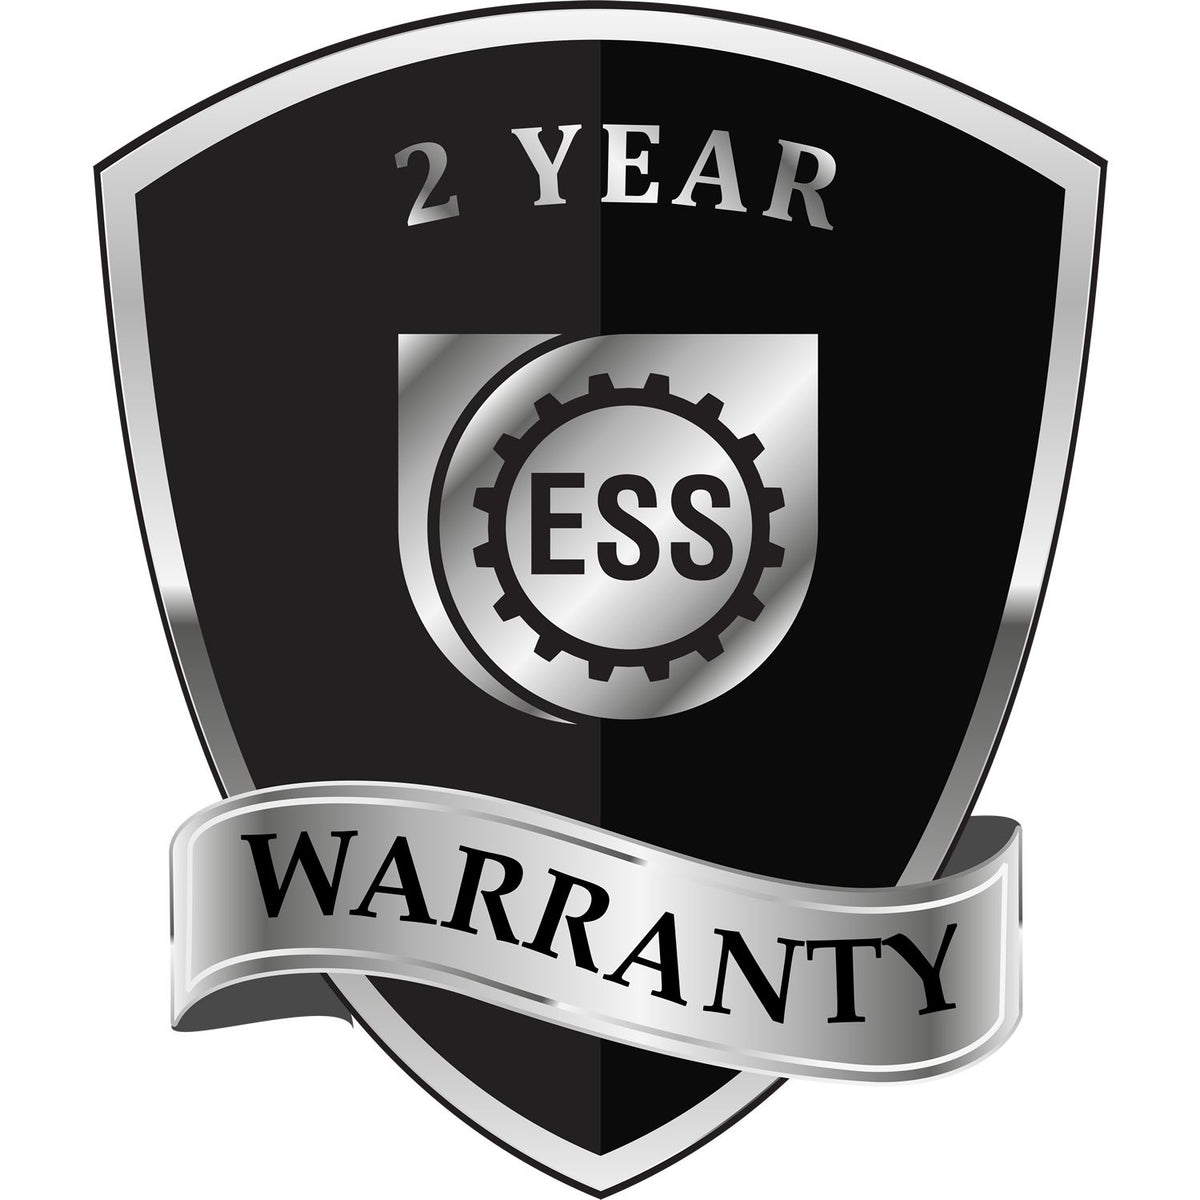 A black and silver badge or emblem showing warranty information for the Hybrid Delaware Architect Seal